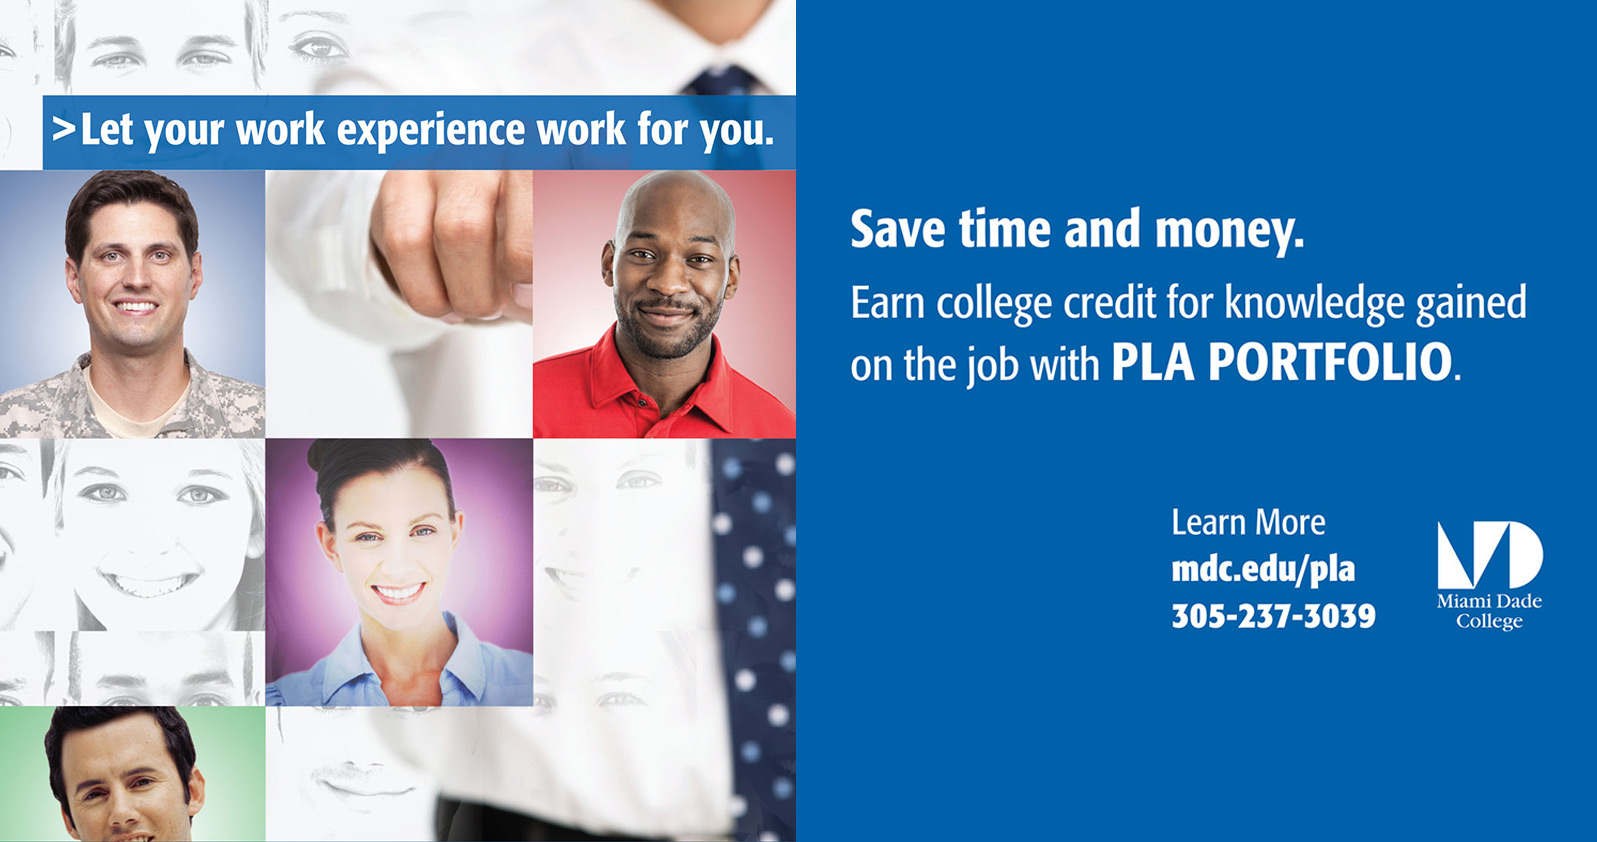 Learn how you can earn college credit for your experiences